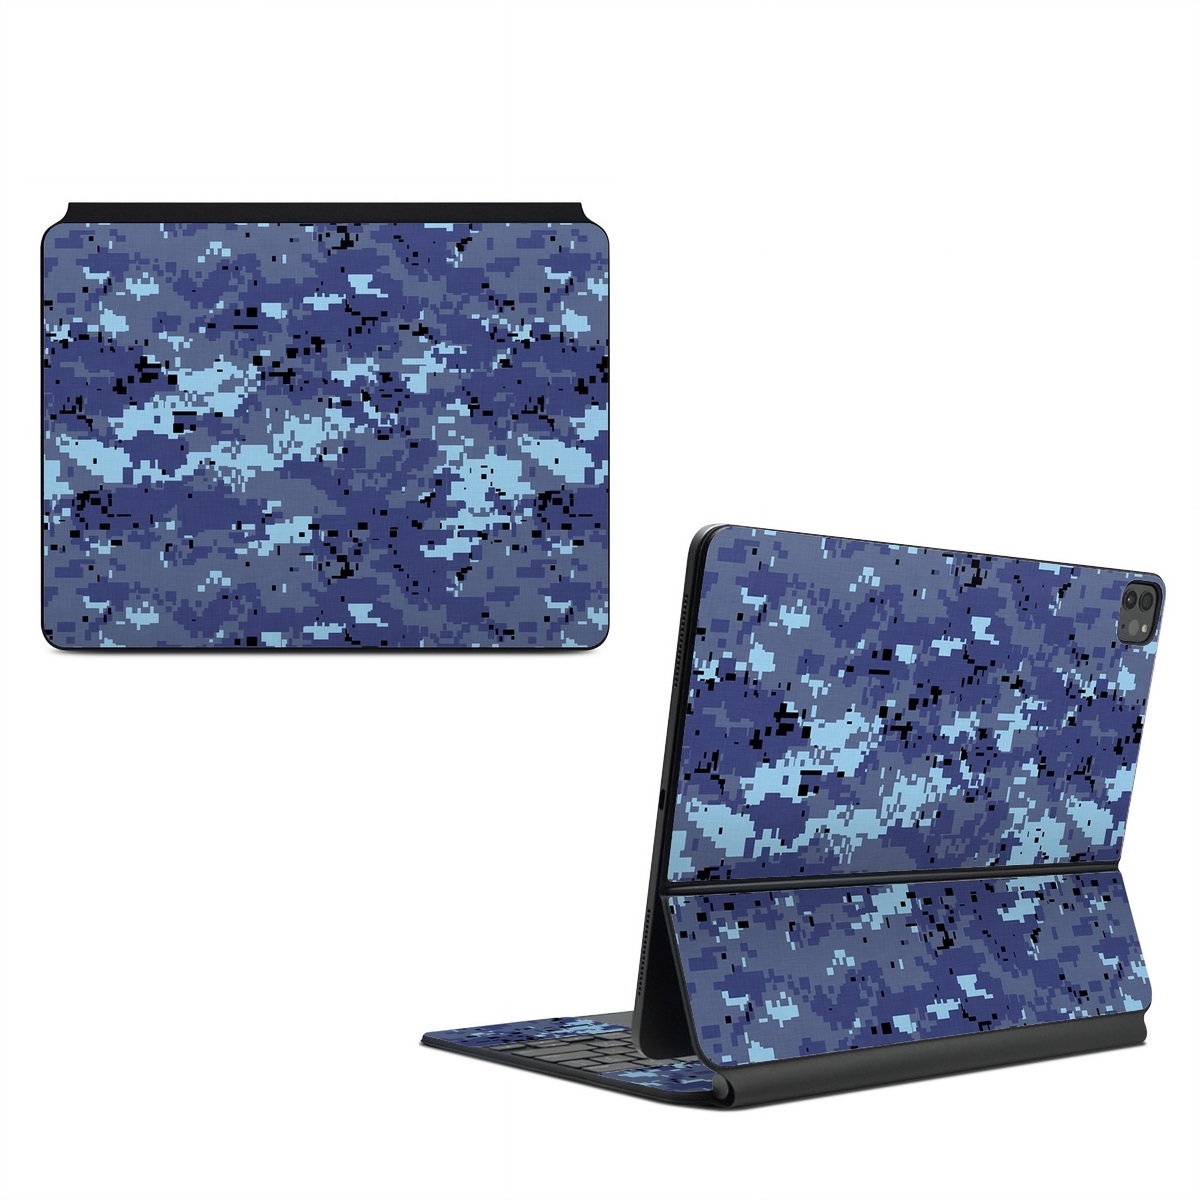 Magic Keyboard for iPad Series Skin design of Blue, Purple, Pattern, Lavender, Violet, Design, with blue, gray, black colors